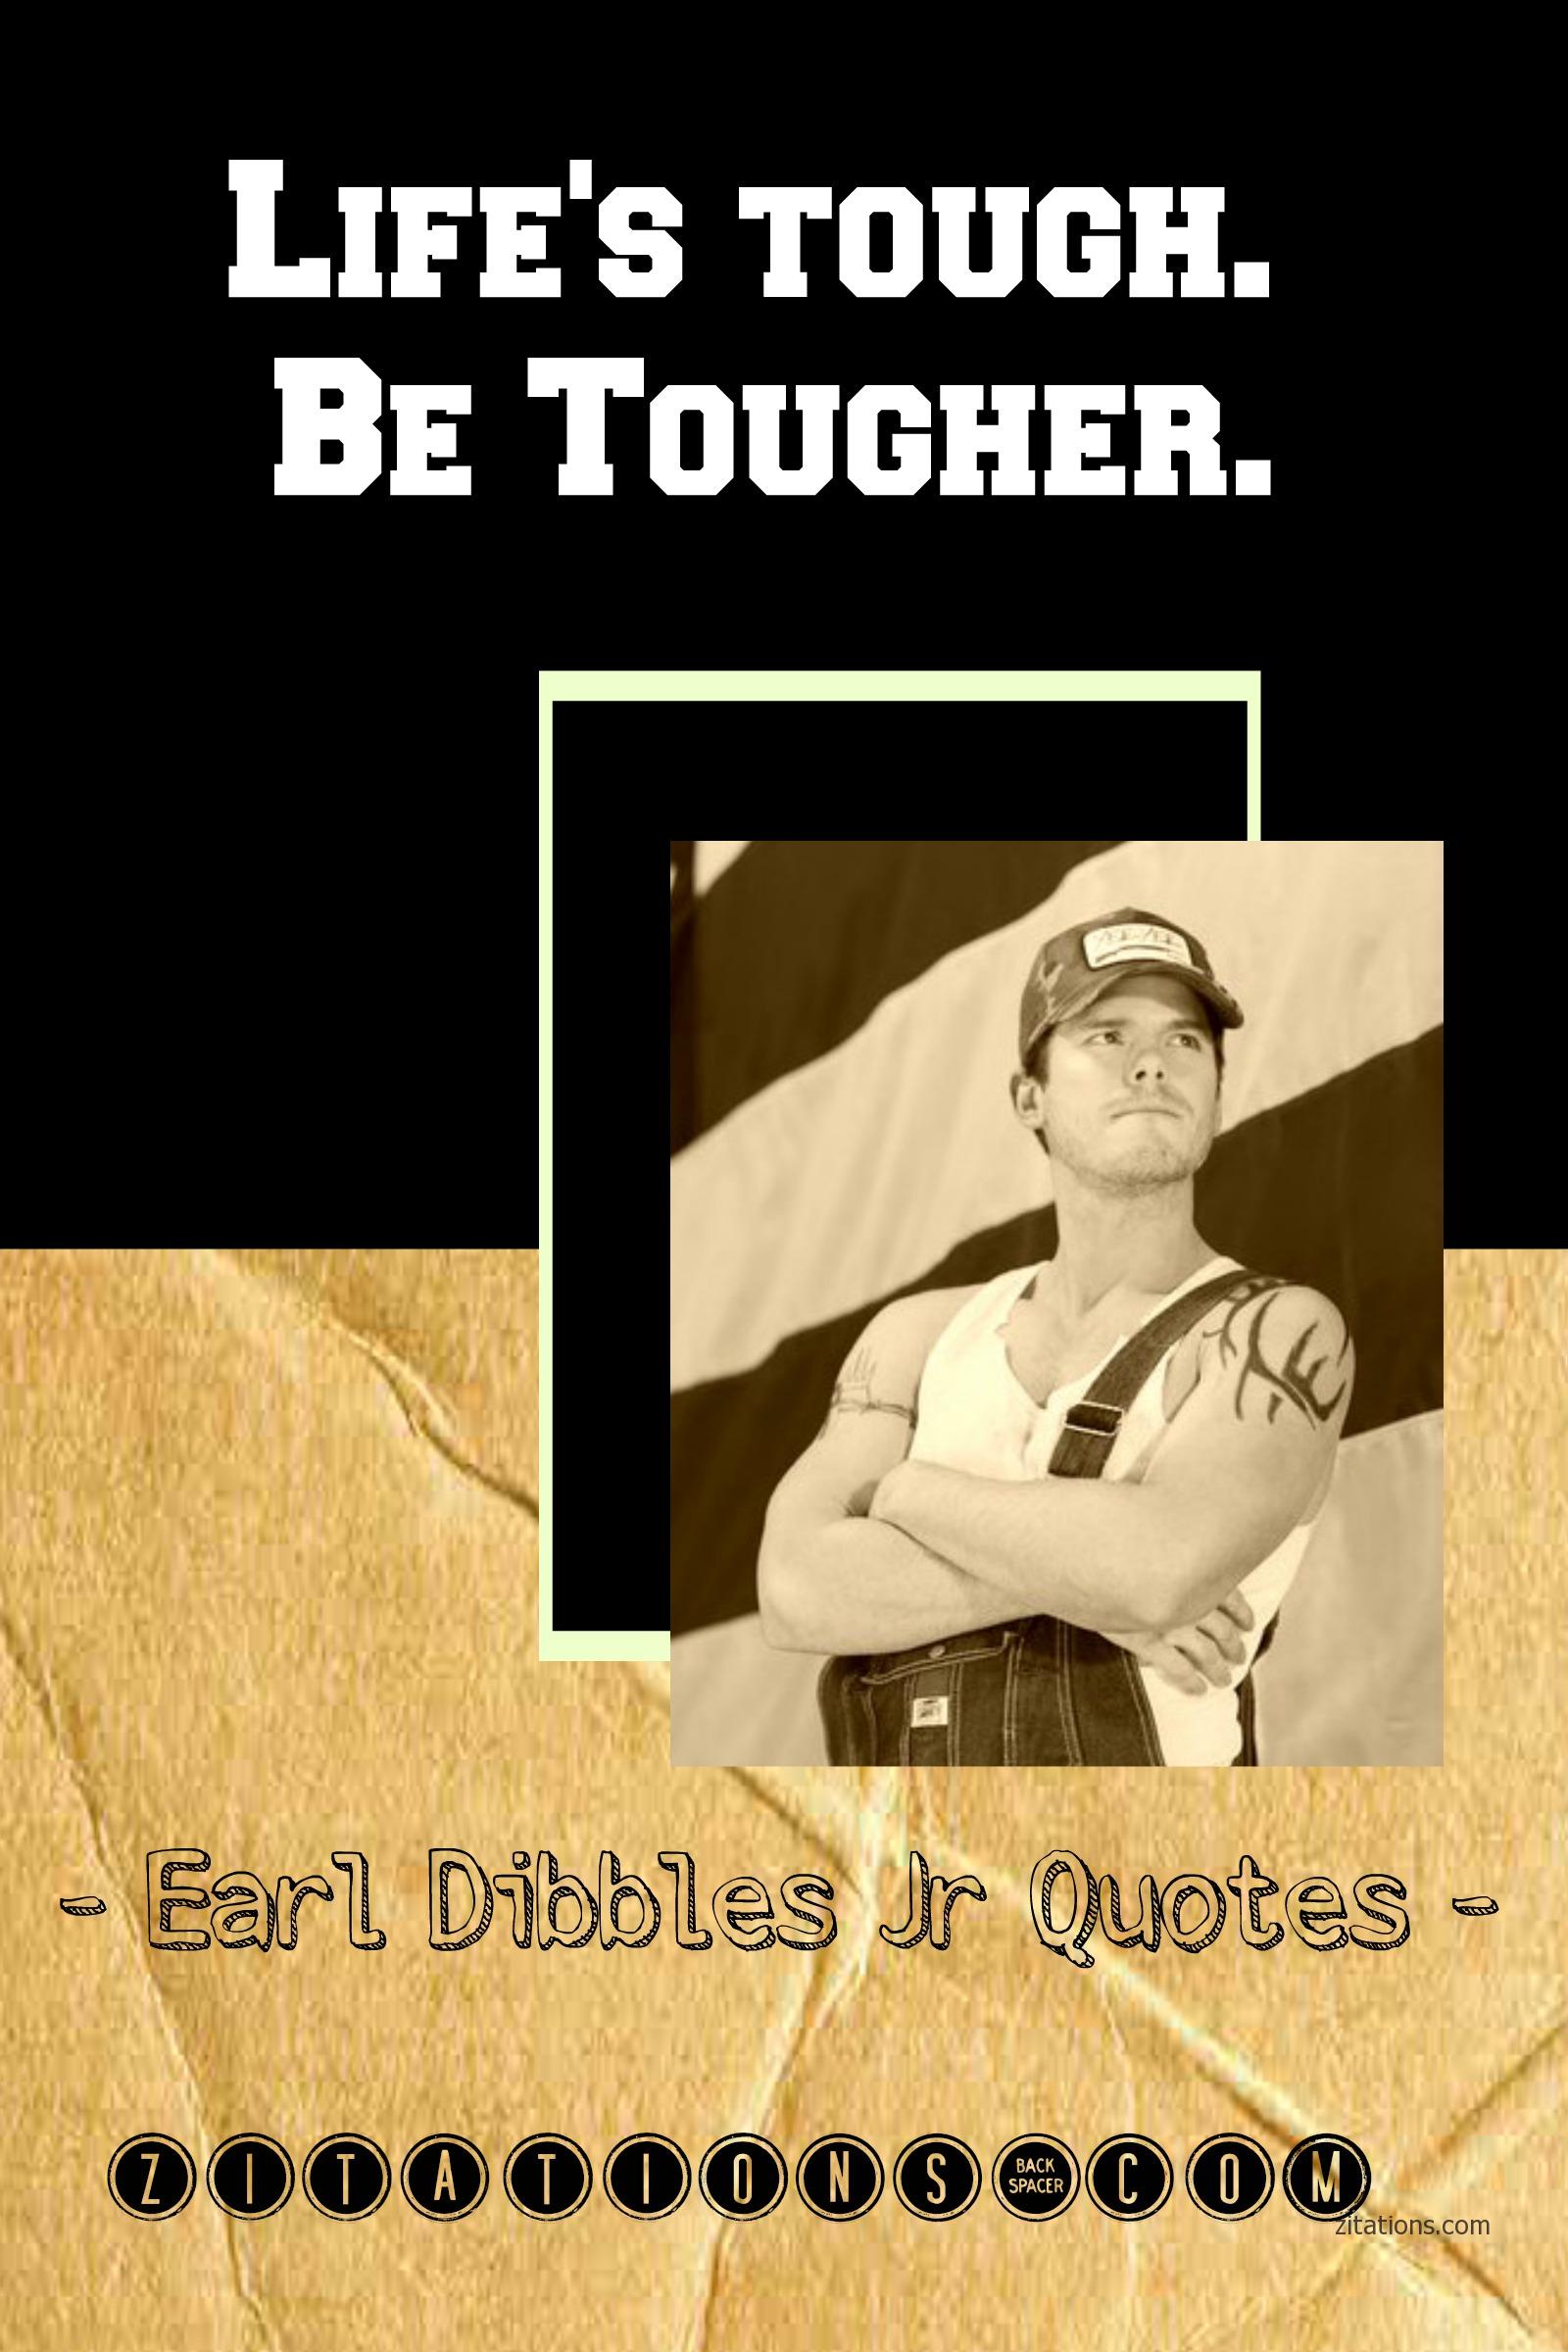 Earl Dibbles Jr Quotes on Life